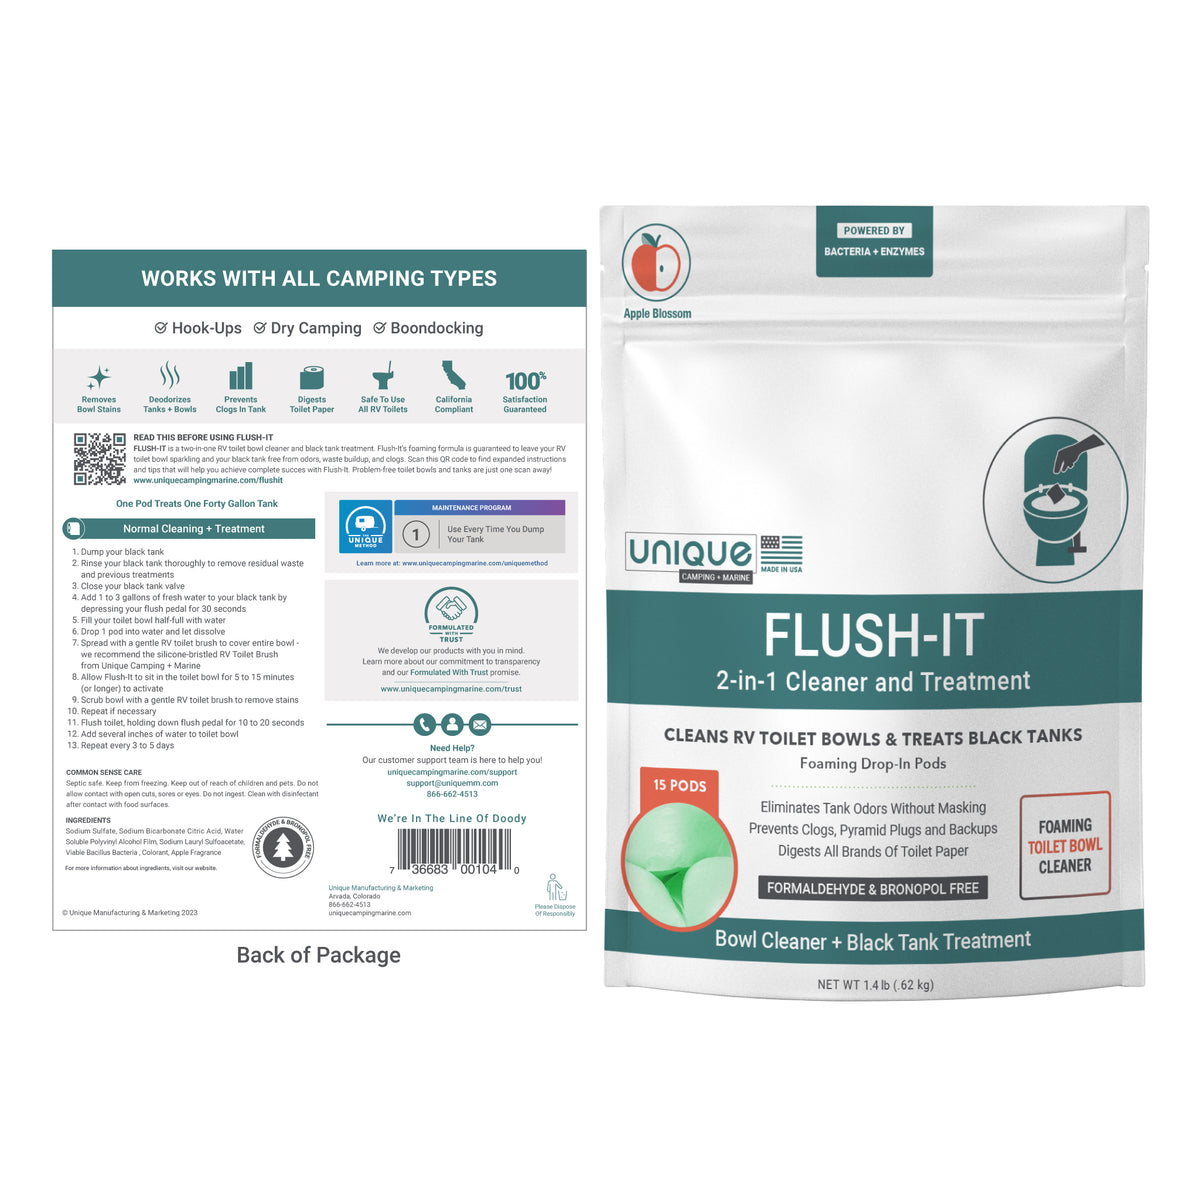 Flush-It 2-In-1 Cleaner and Treatment full label